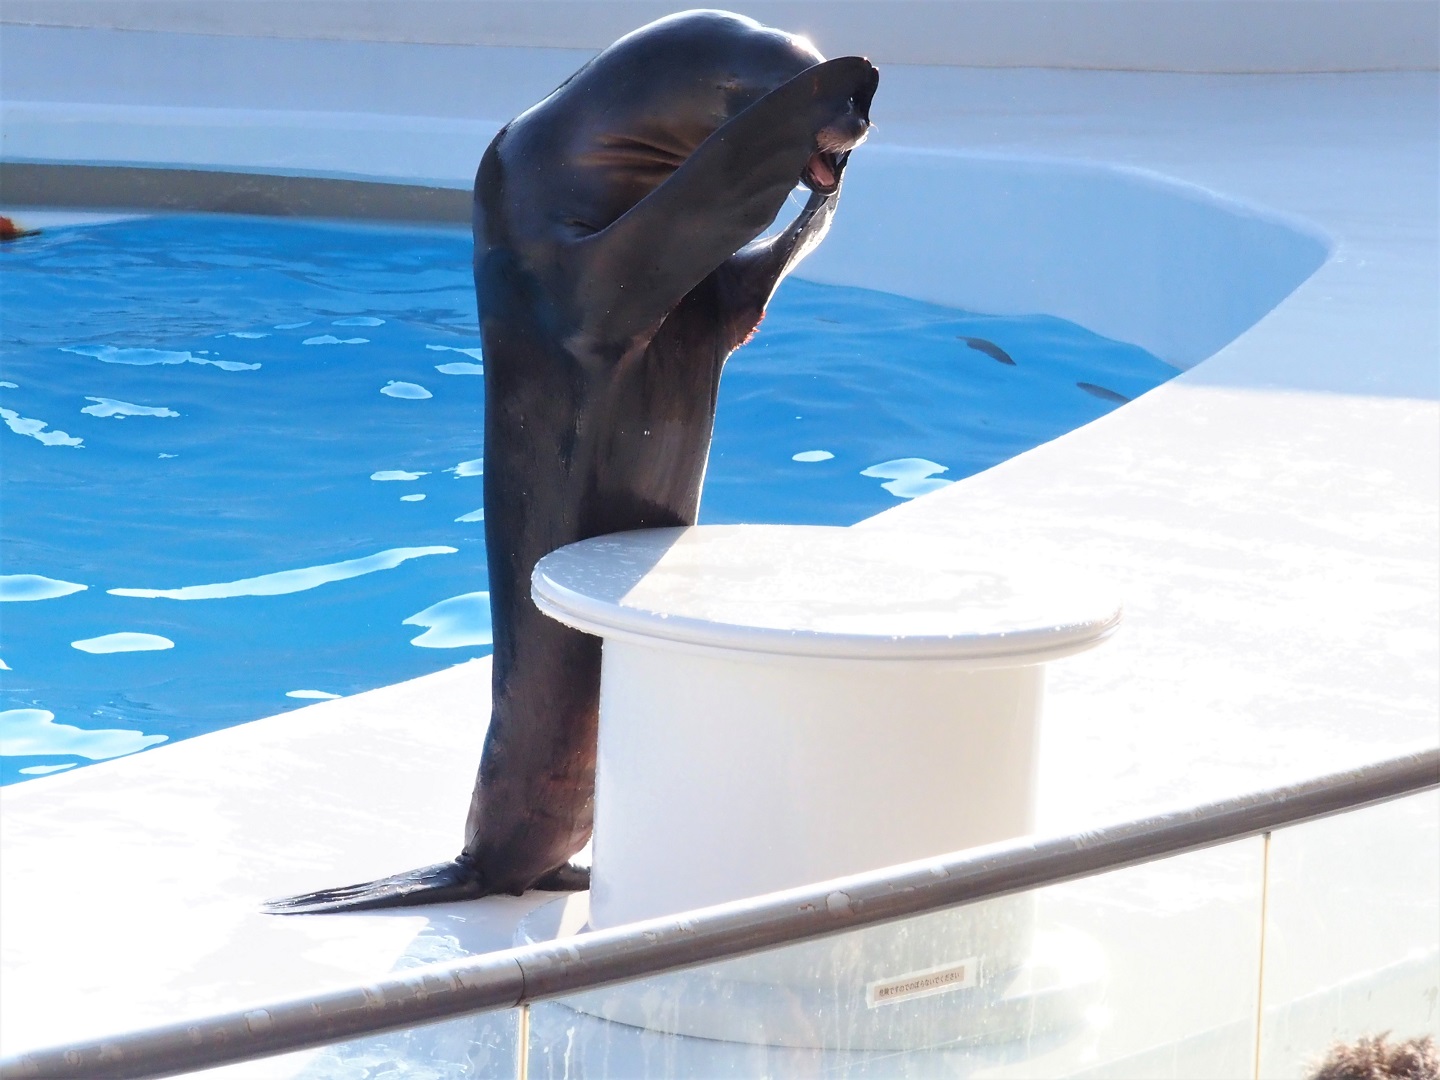 Sea lion during performance